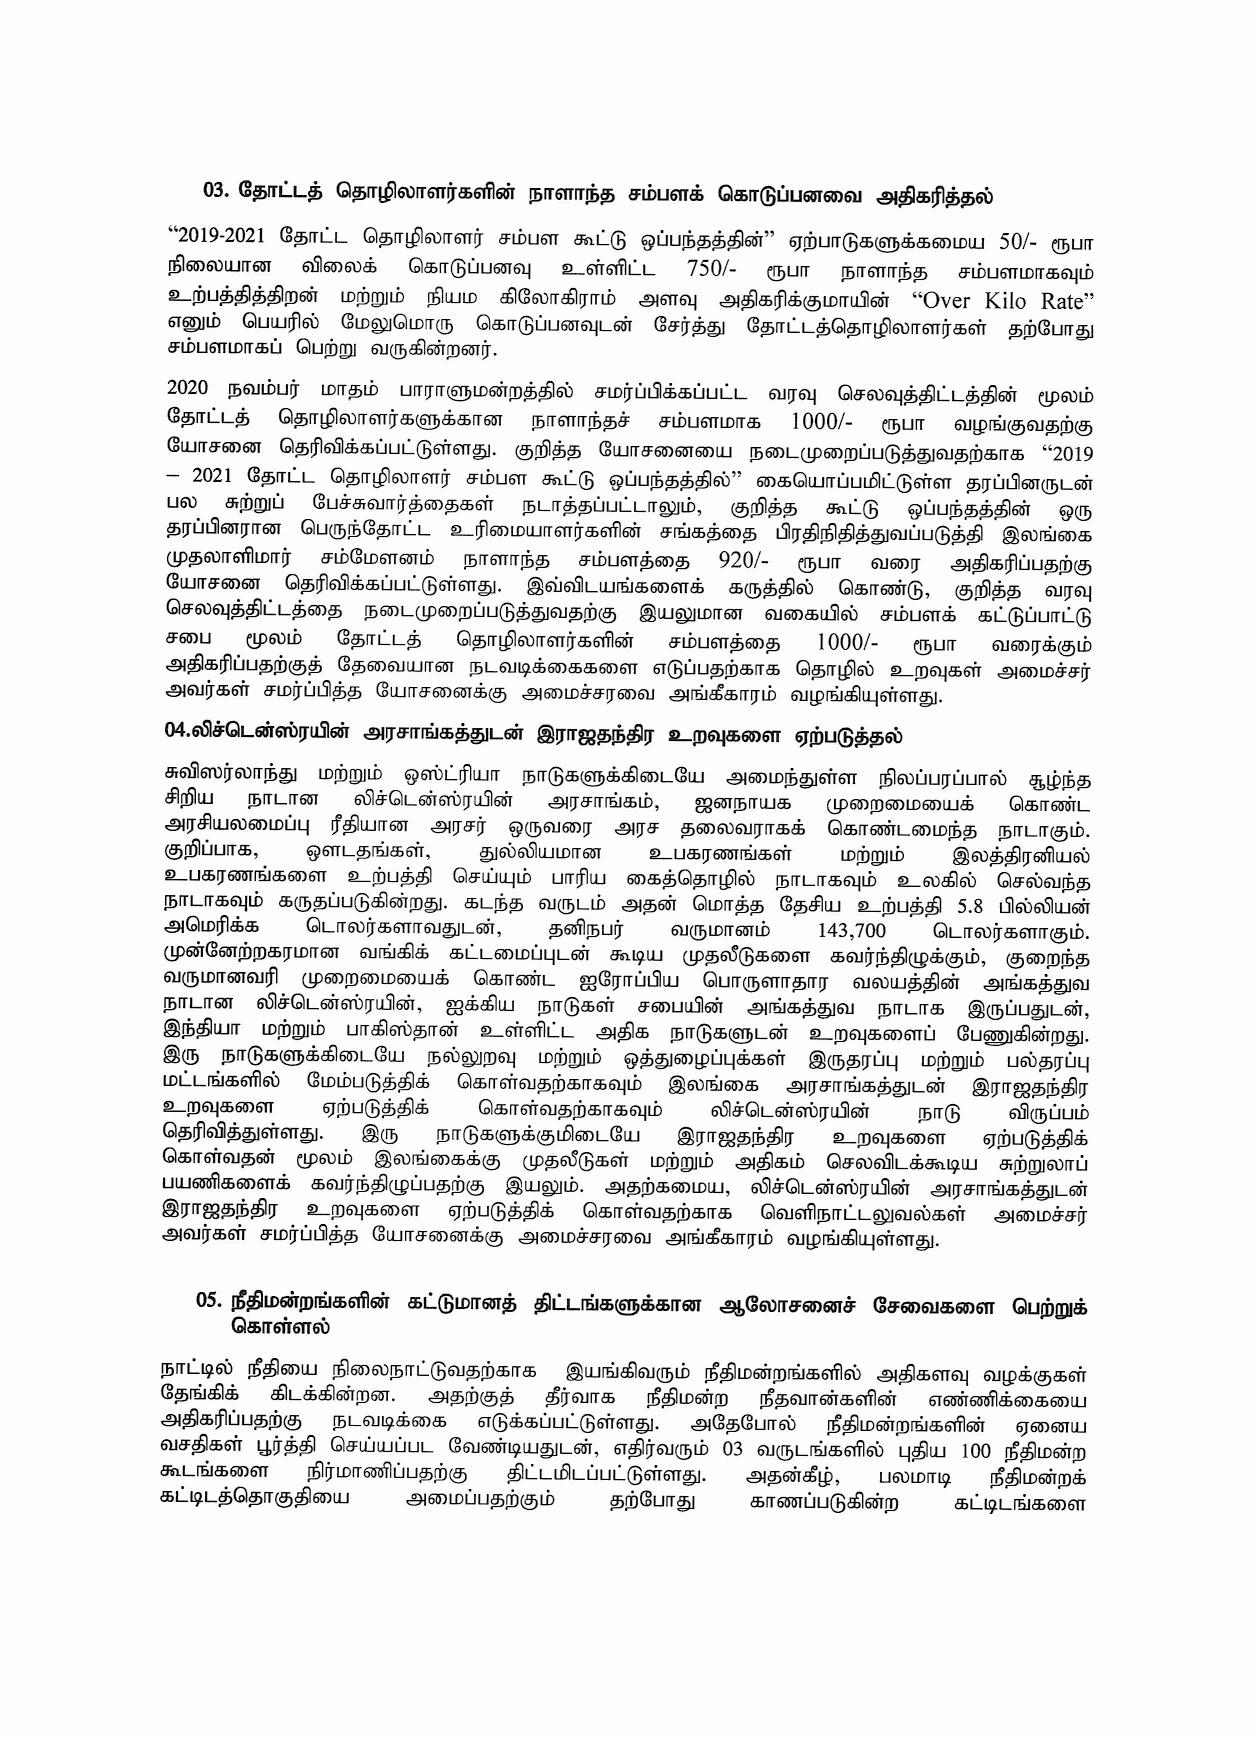 Cabinet Decision on 25.01.2021 Tamil page 002